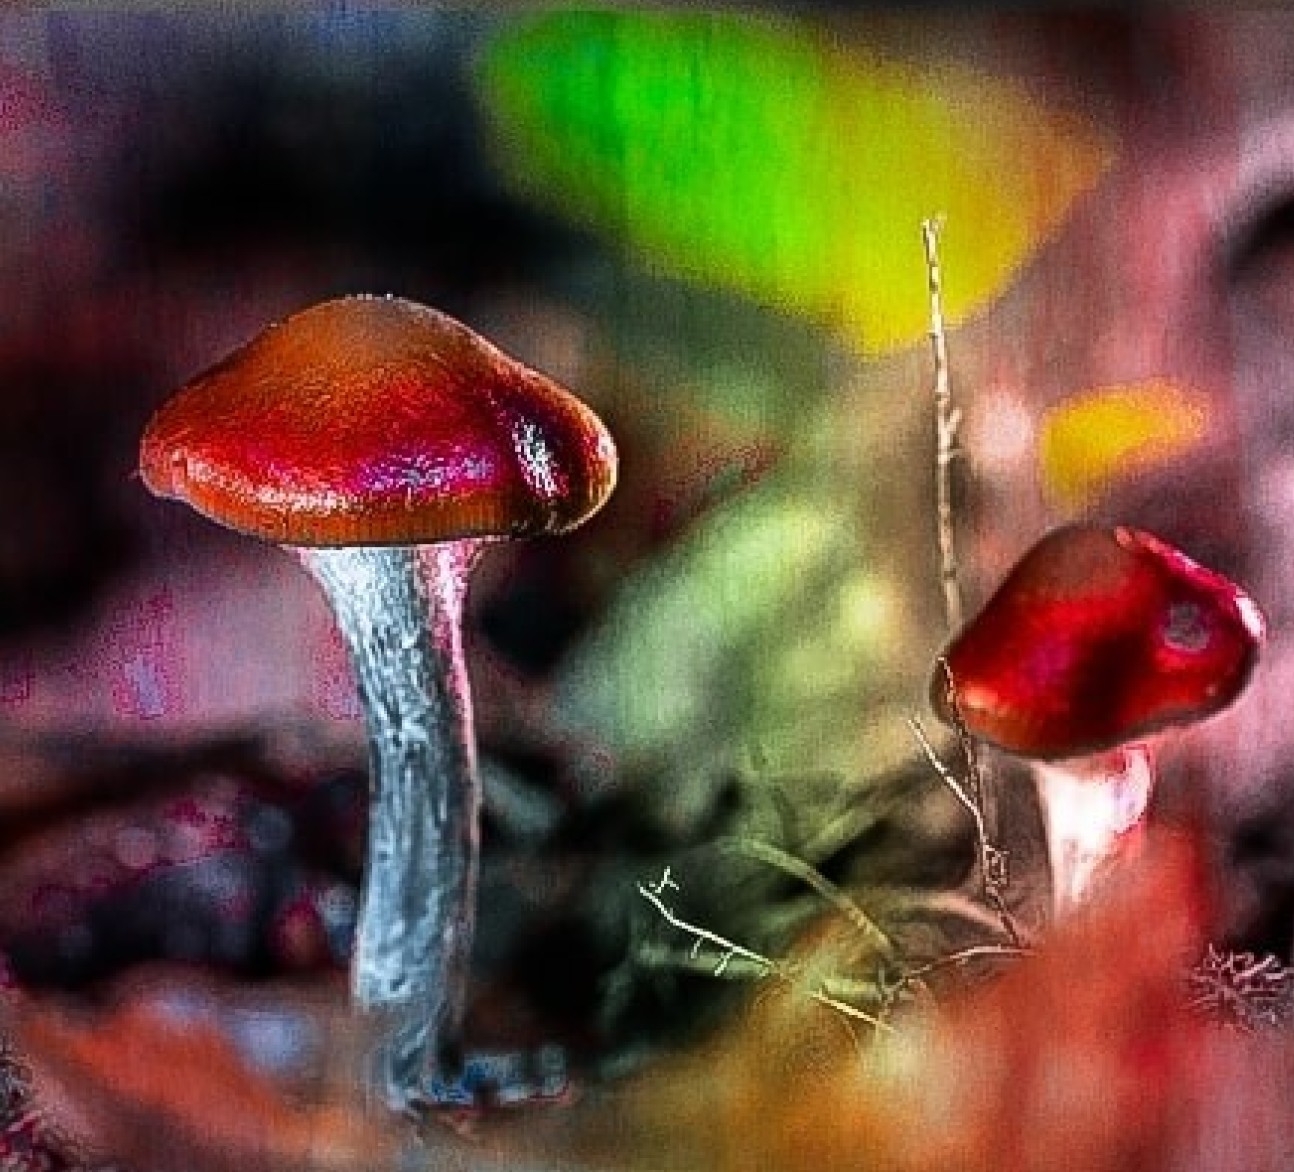 Photo showing two mushrooms with subtle psychedelic discolouration